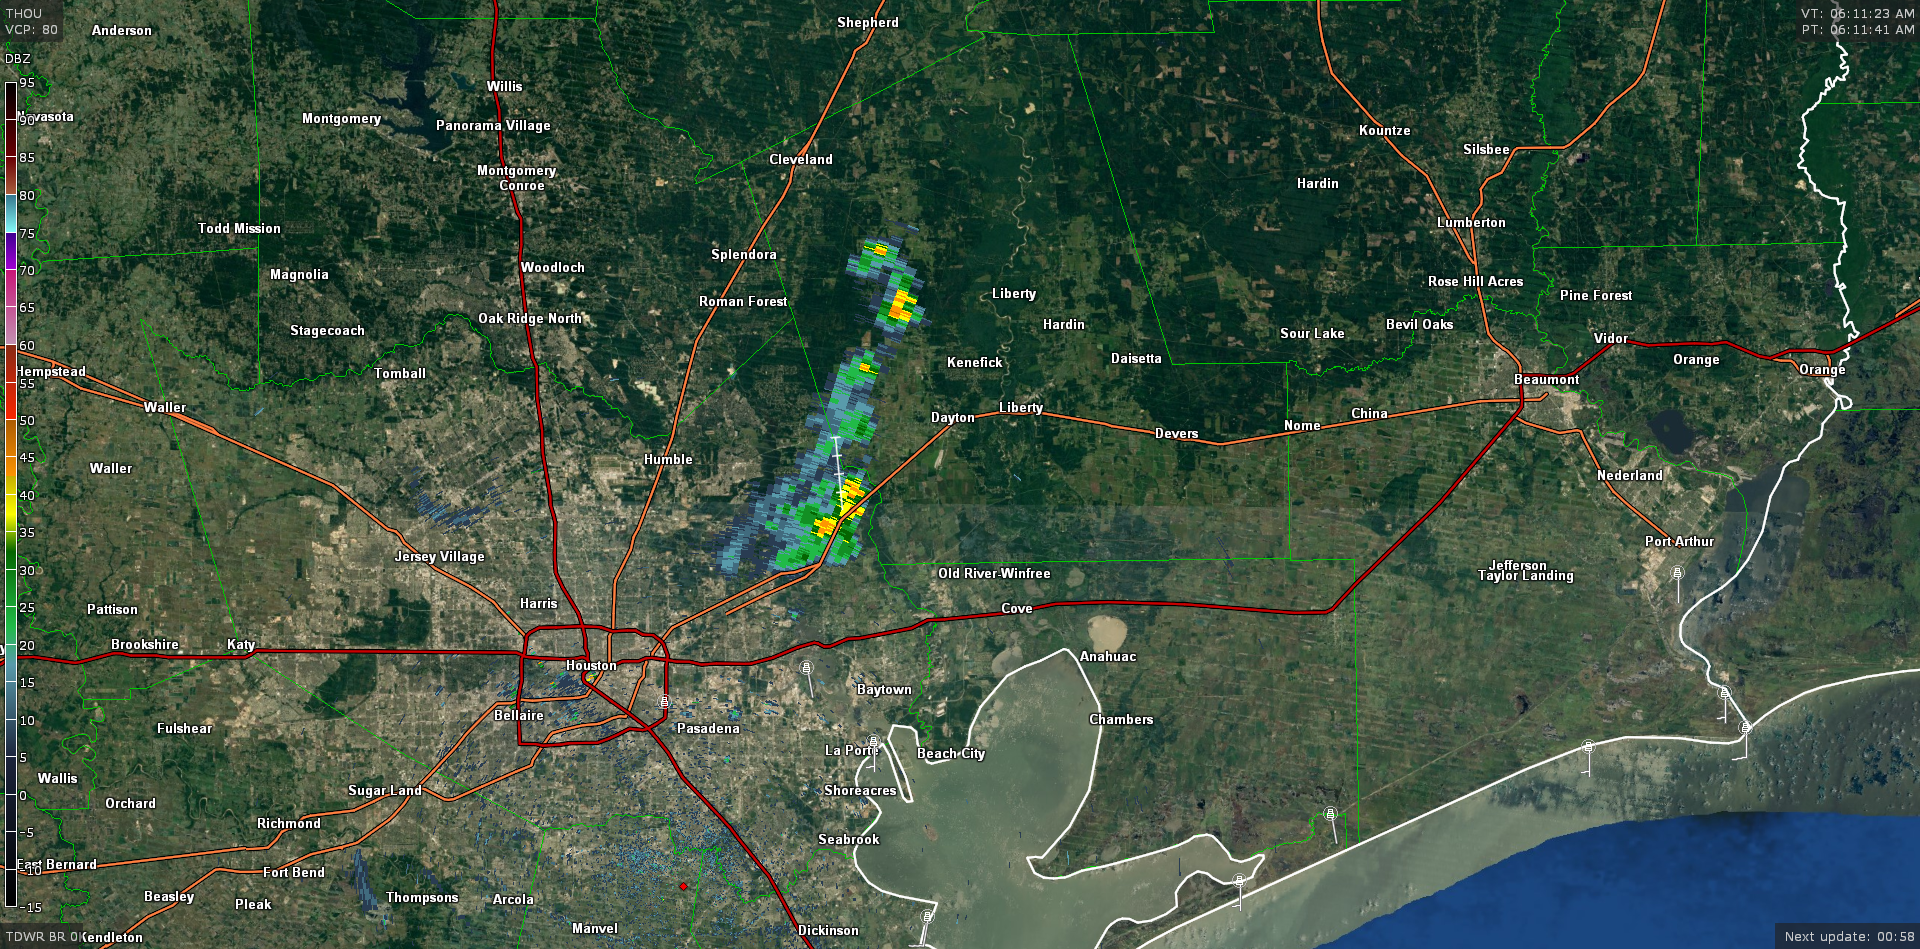 Radar shows just a few showers drifting north and northeast toward Liberty County. (GR Level 3)